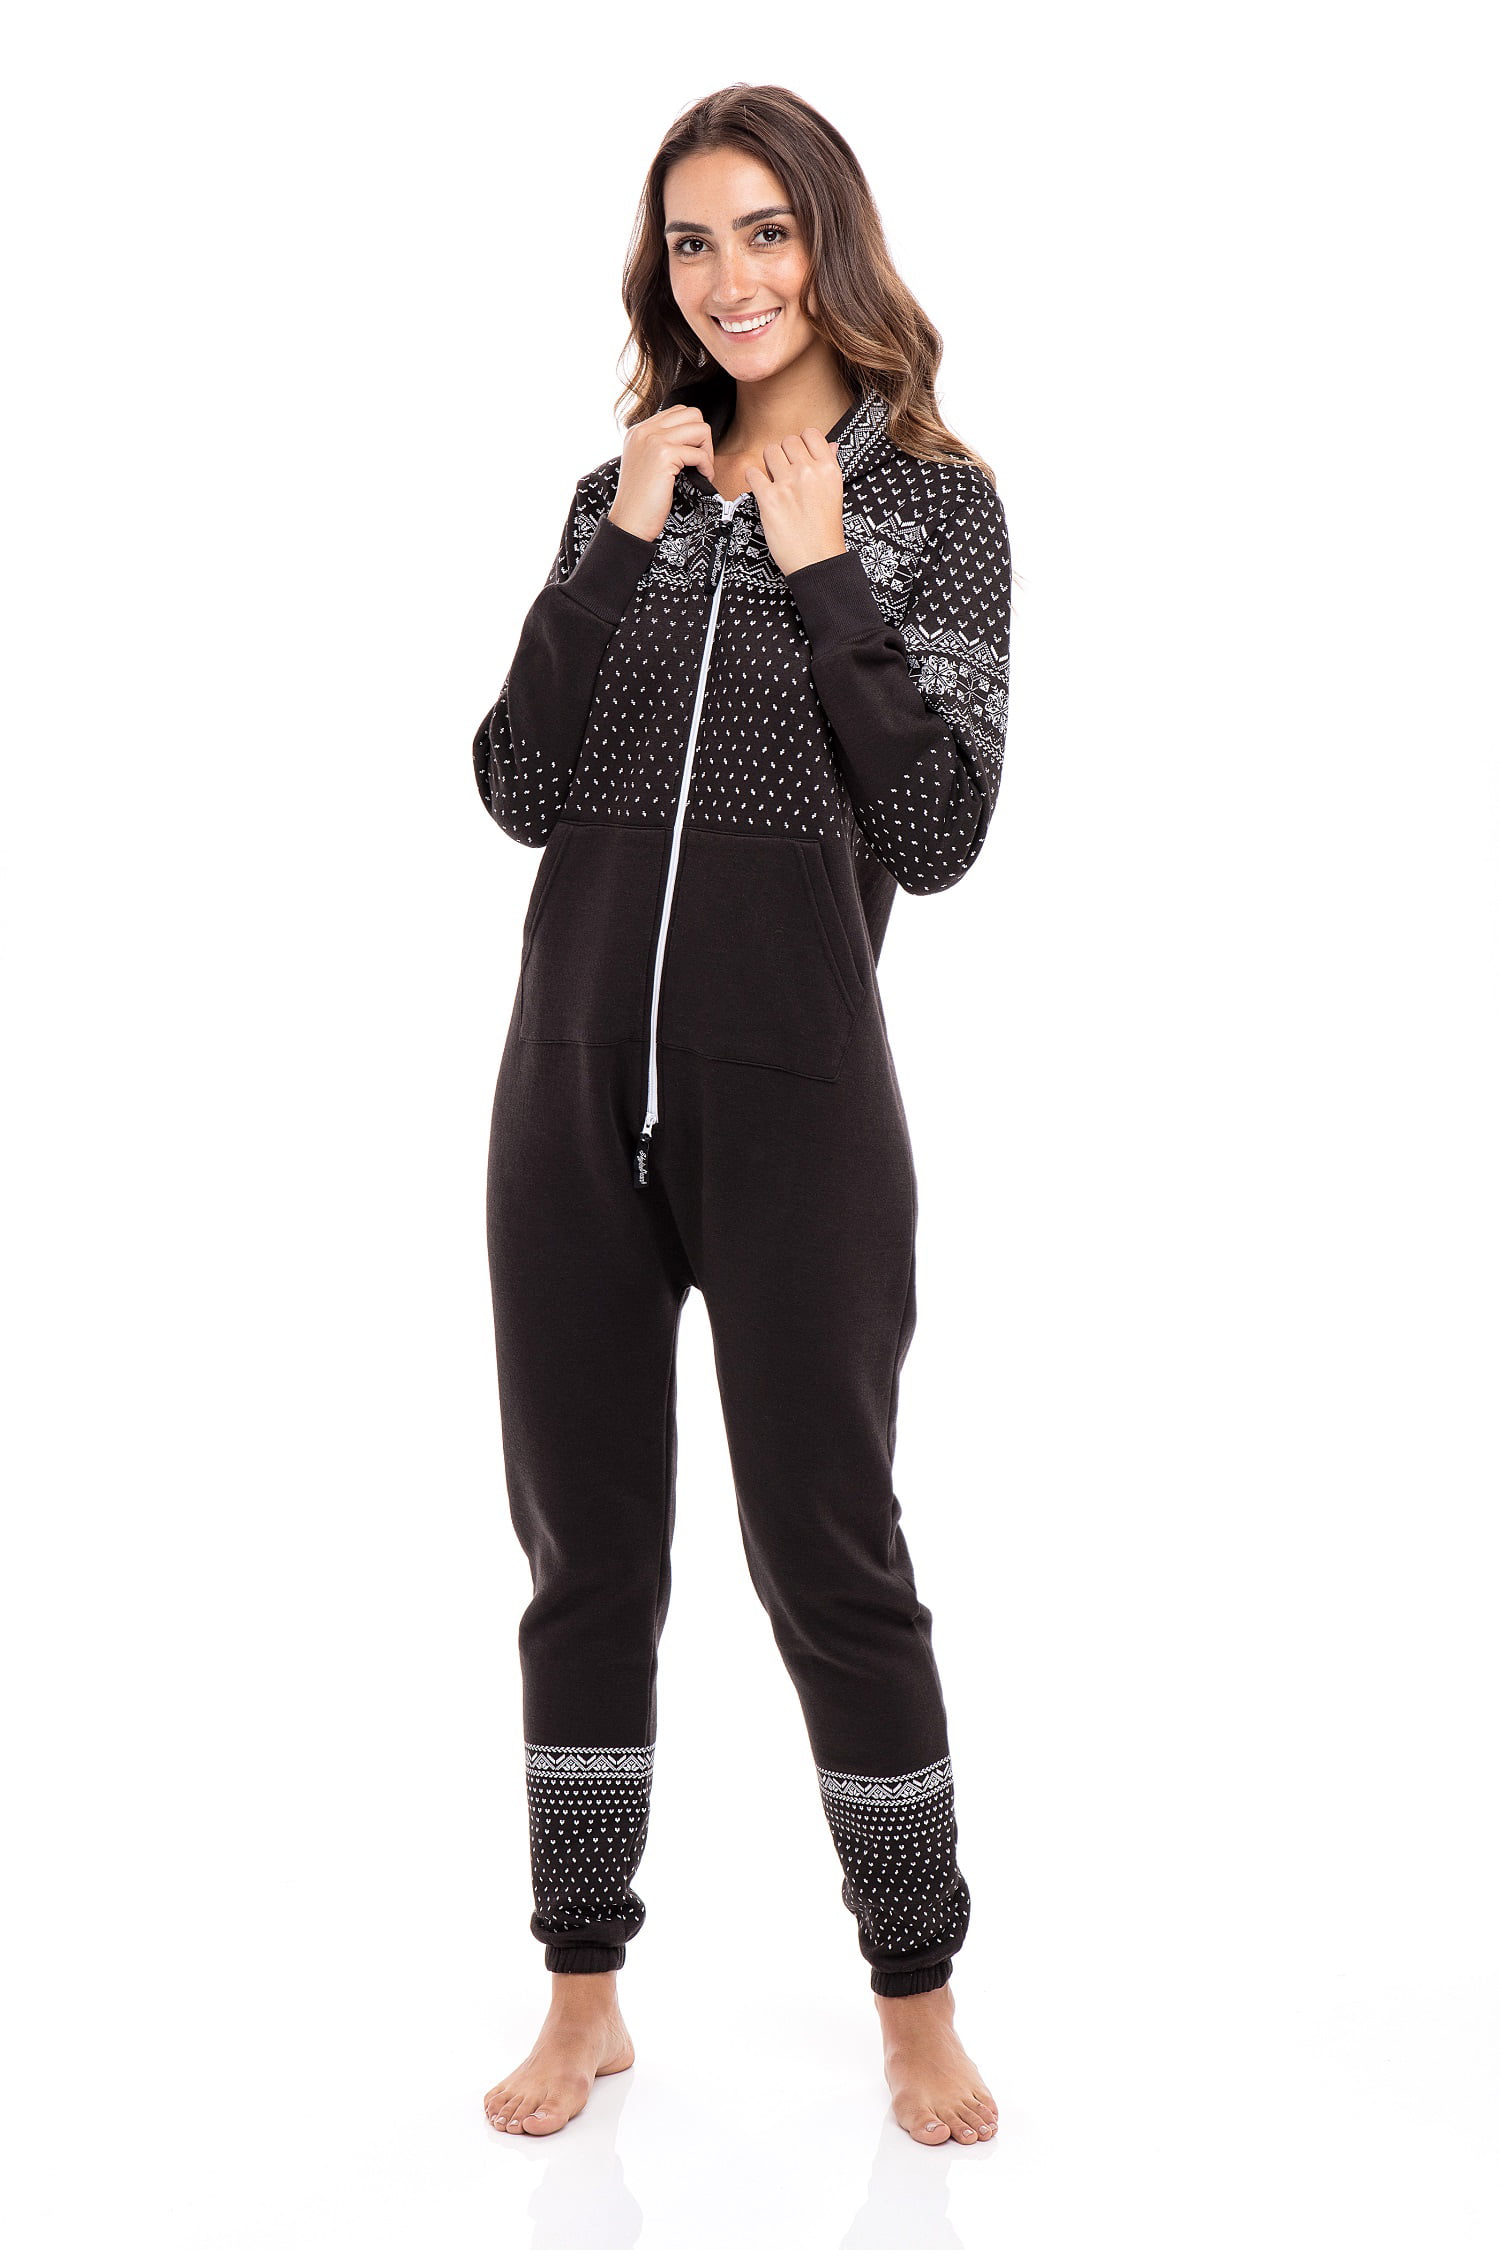 Women S Unisex Adult Onesie0 One Piece Non Footed Pajama Playsuit